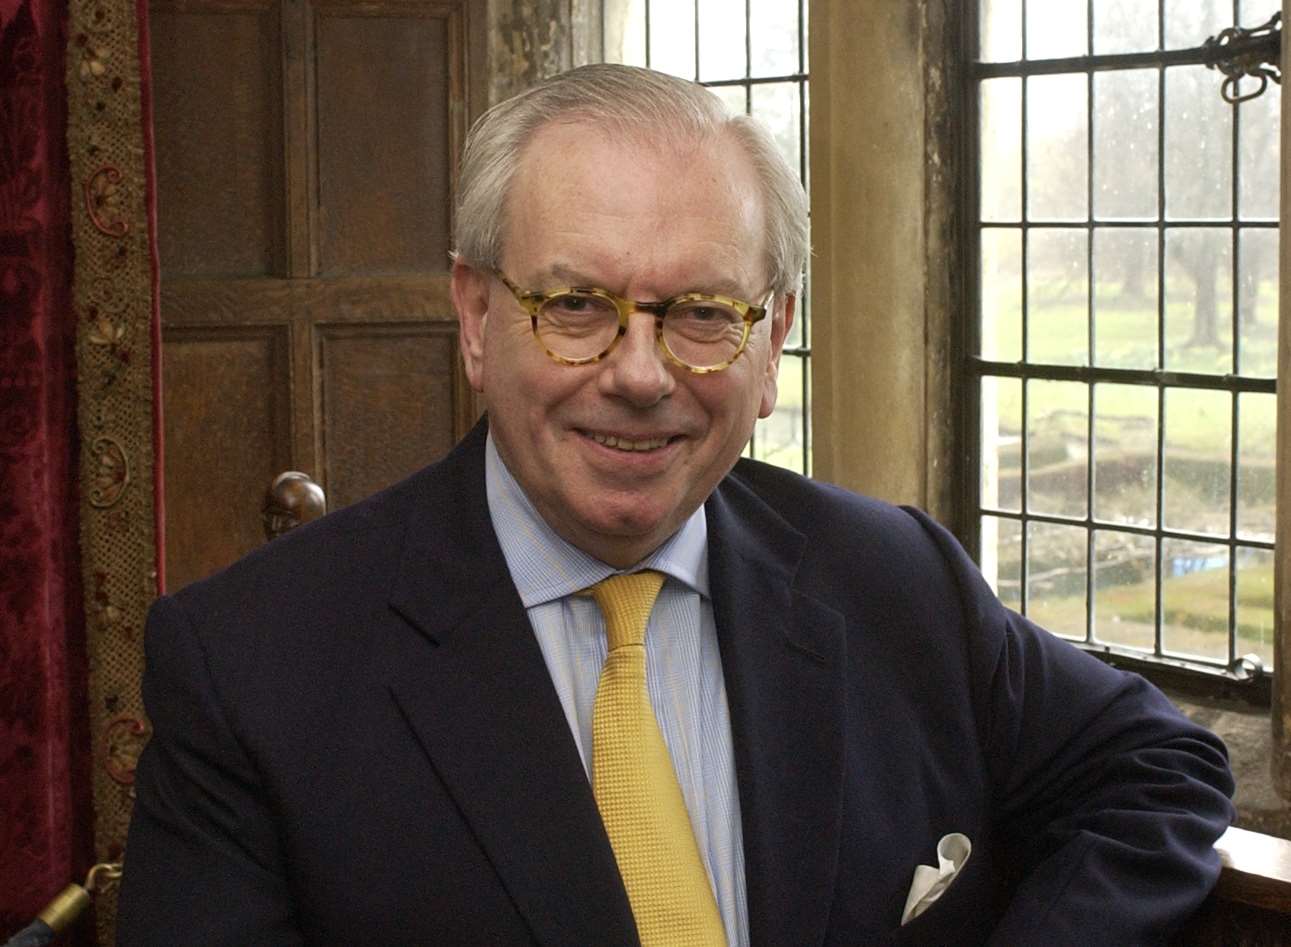 Historian and TV presenter David Starkey is supporting Kent Teacher of the Year Awards which are open to nominations.